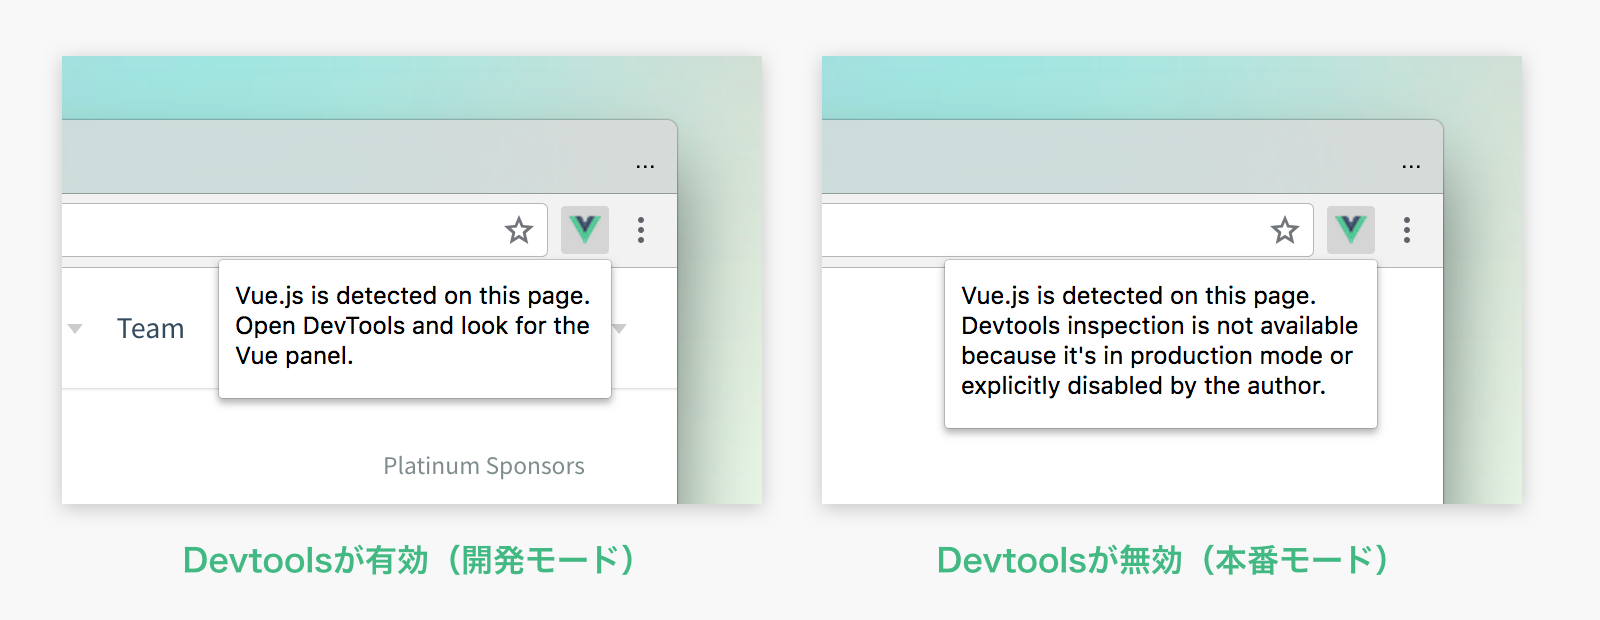 Vue.js devtools available or not